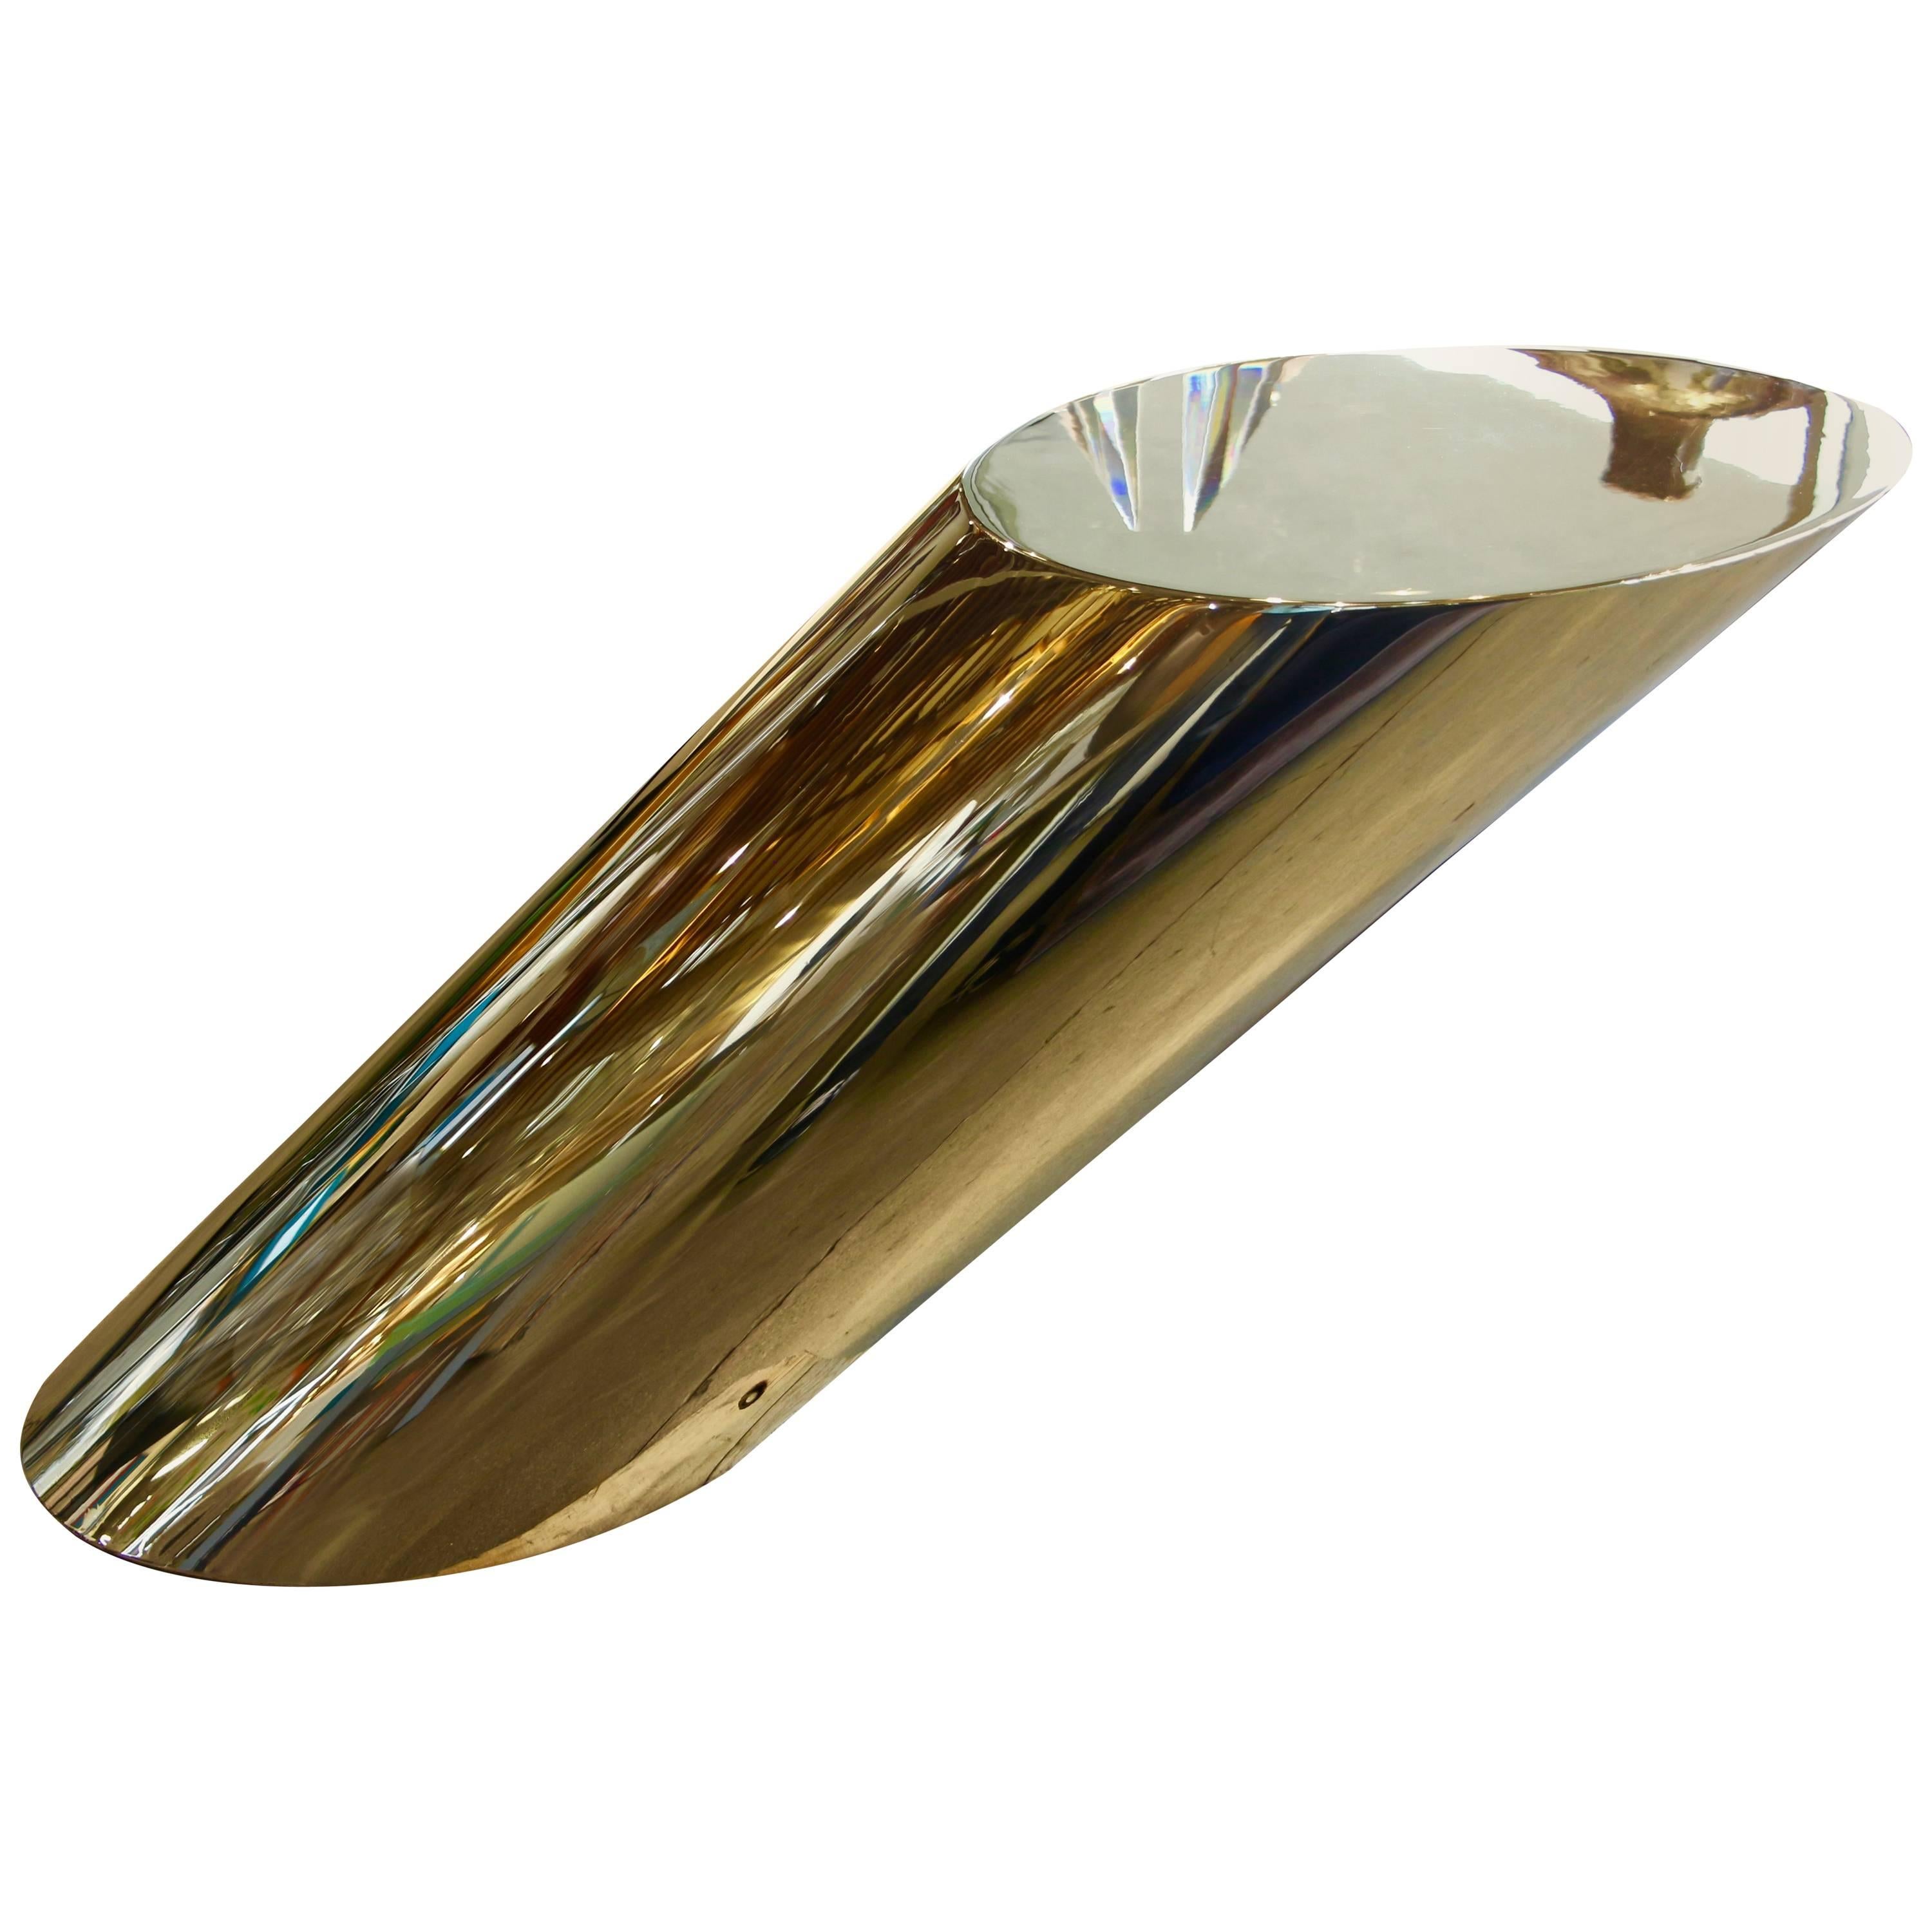 J. Wade Beam "Zephyr" Table for Brueton Is Solid Brass